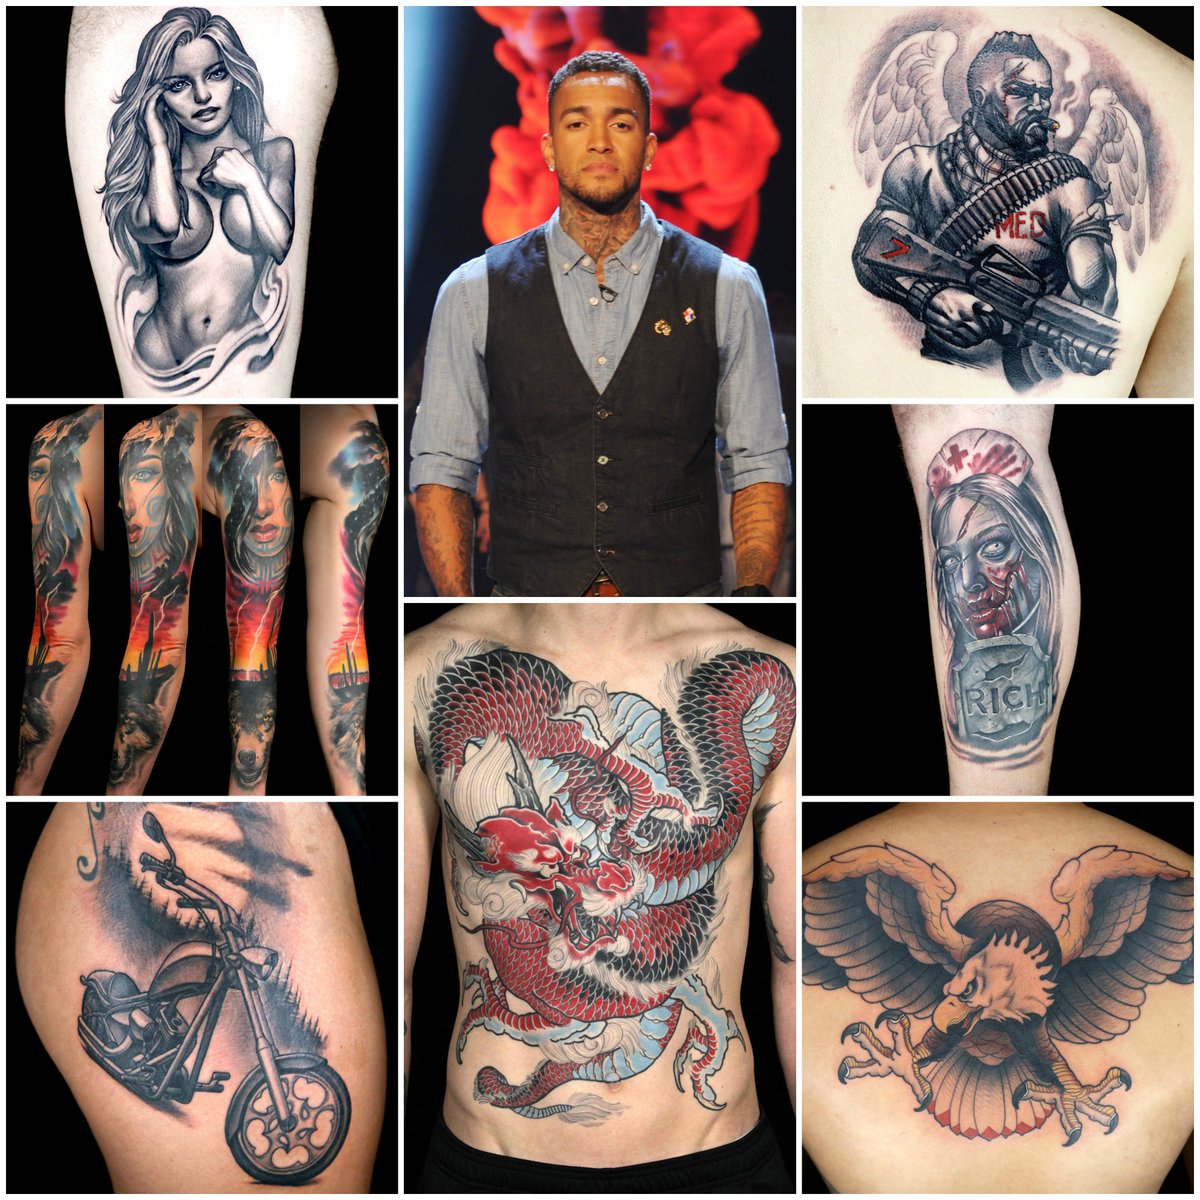 Ink Master Season 7 Cast Member Anthony Michaels Talks Making It To Top 3  Ahead Of Live Finale